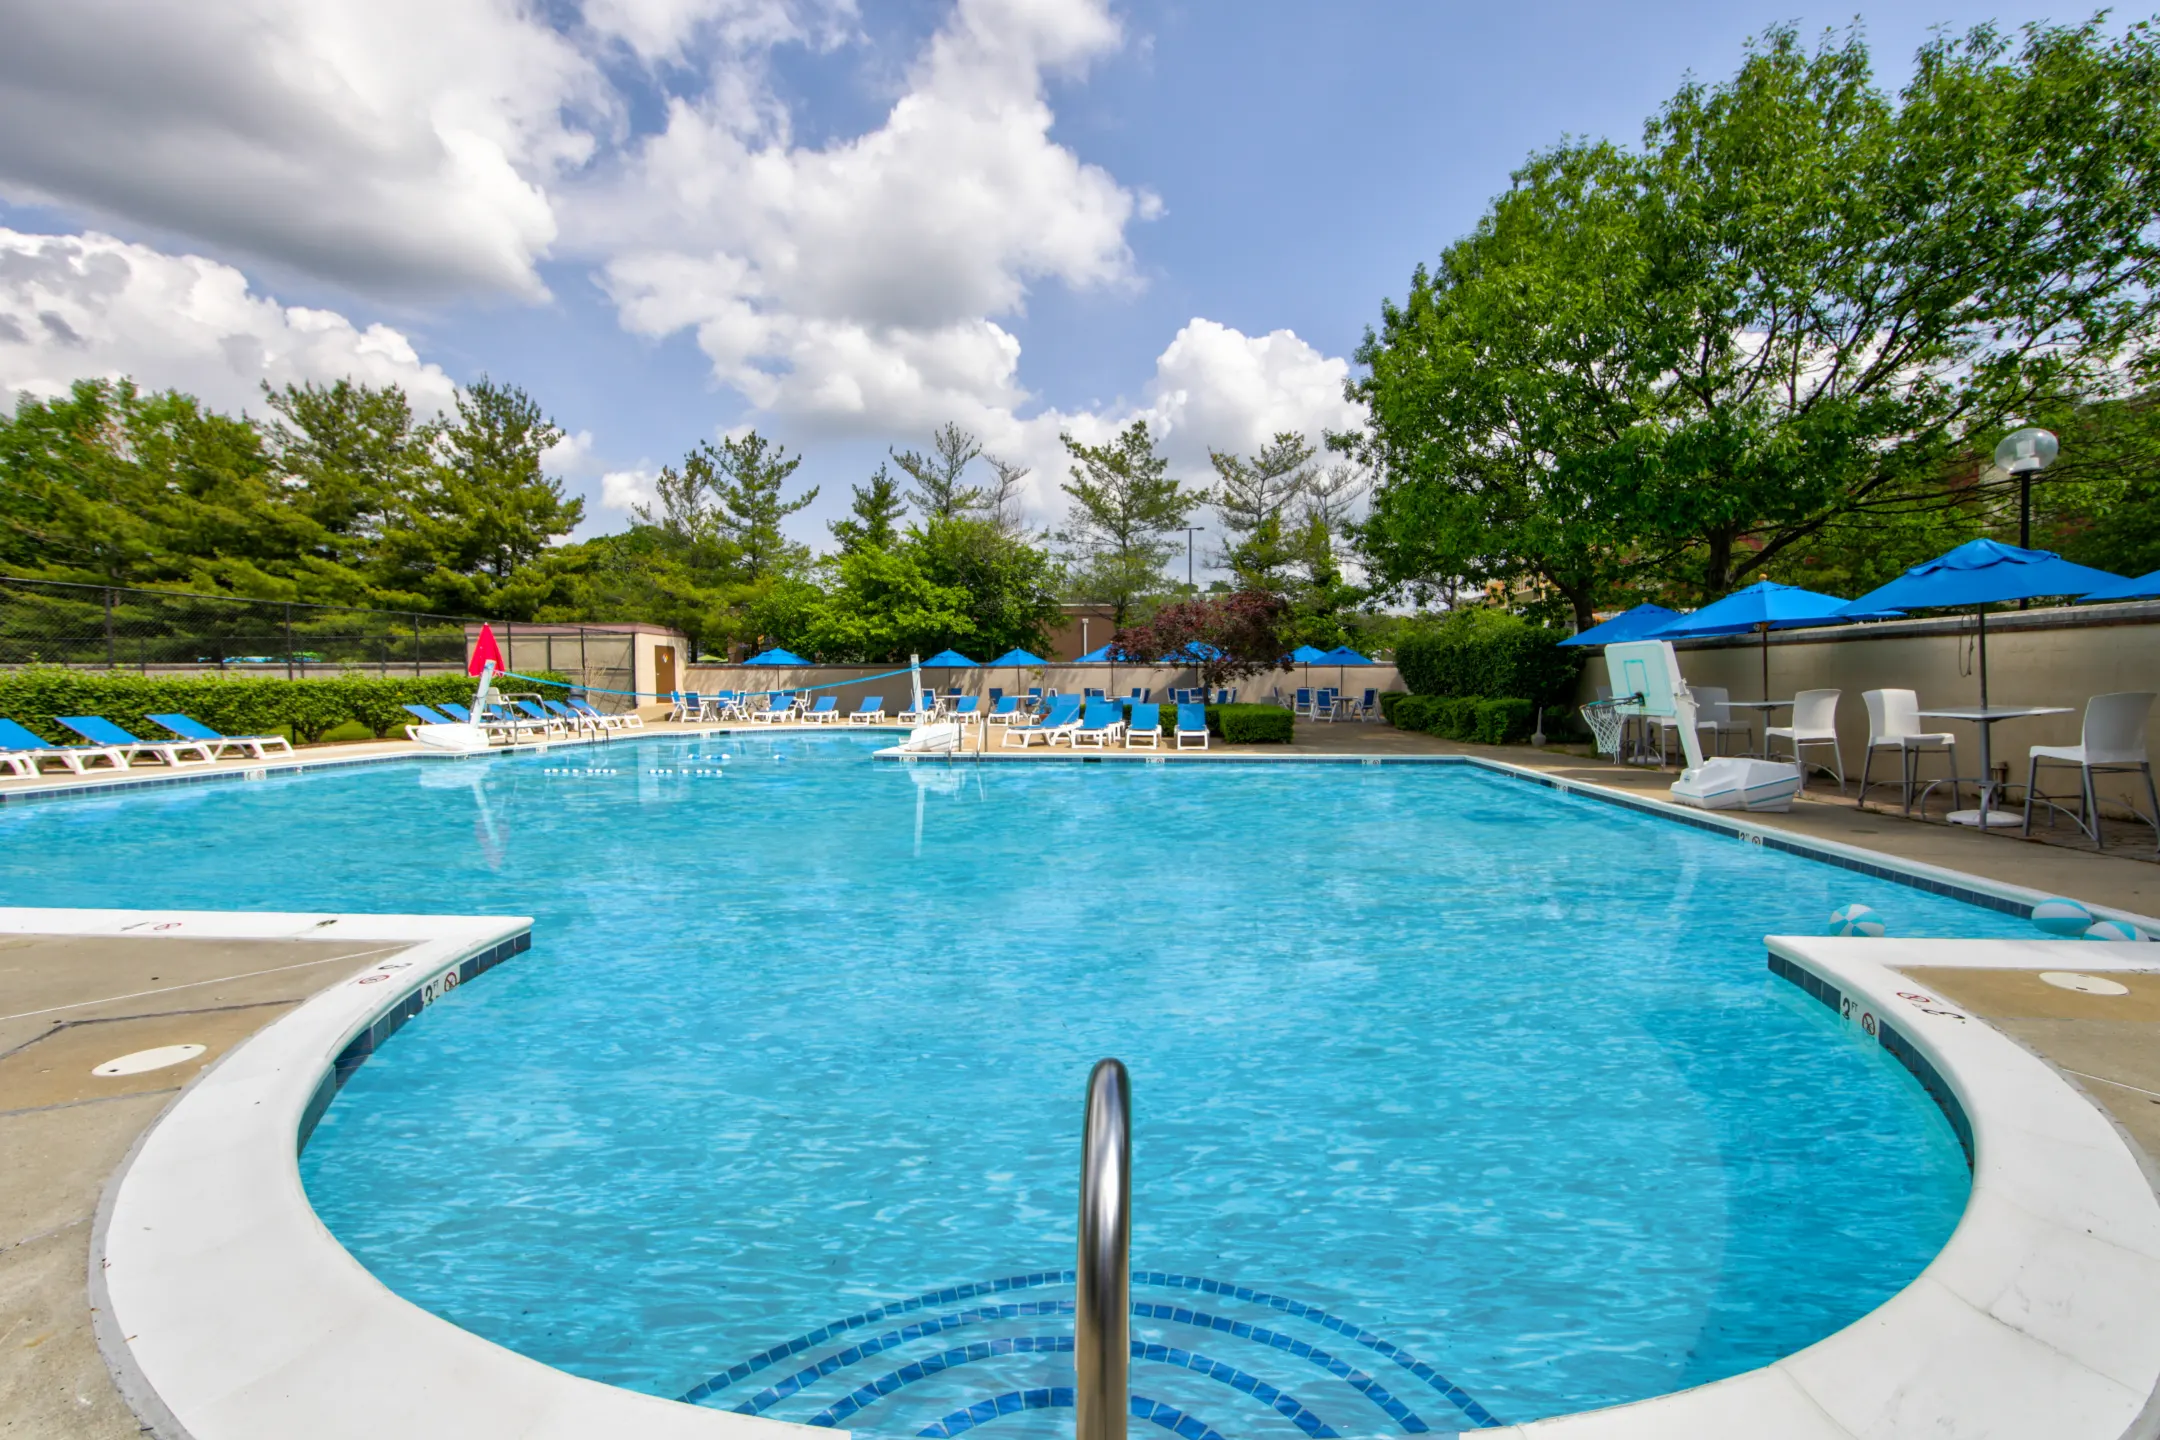 Pool - The Apartments at Miramont - Rockville, MD